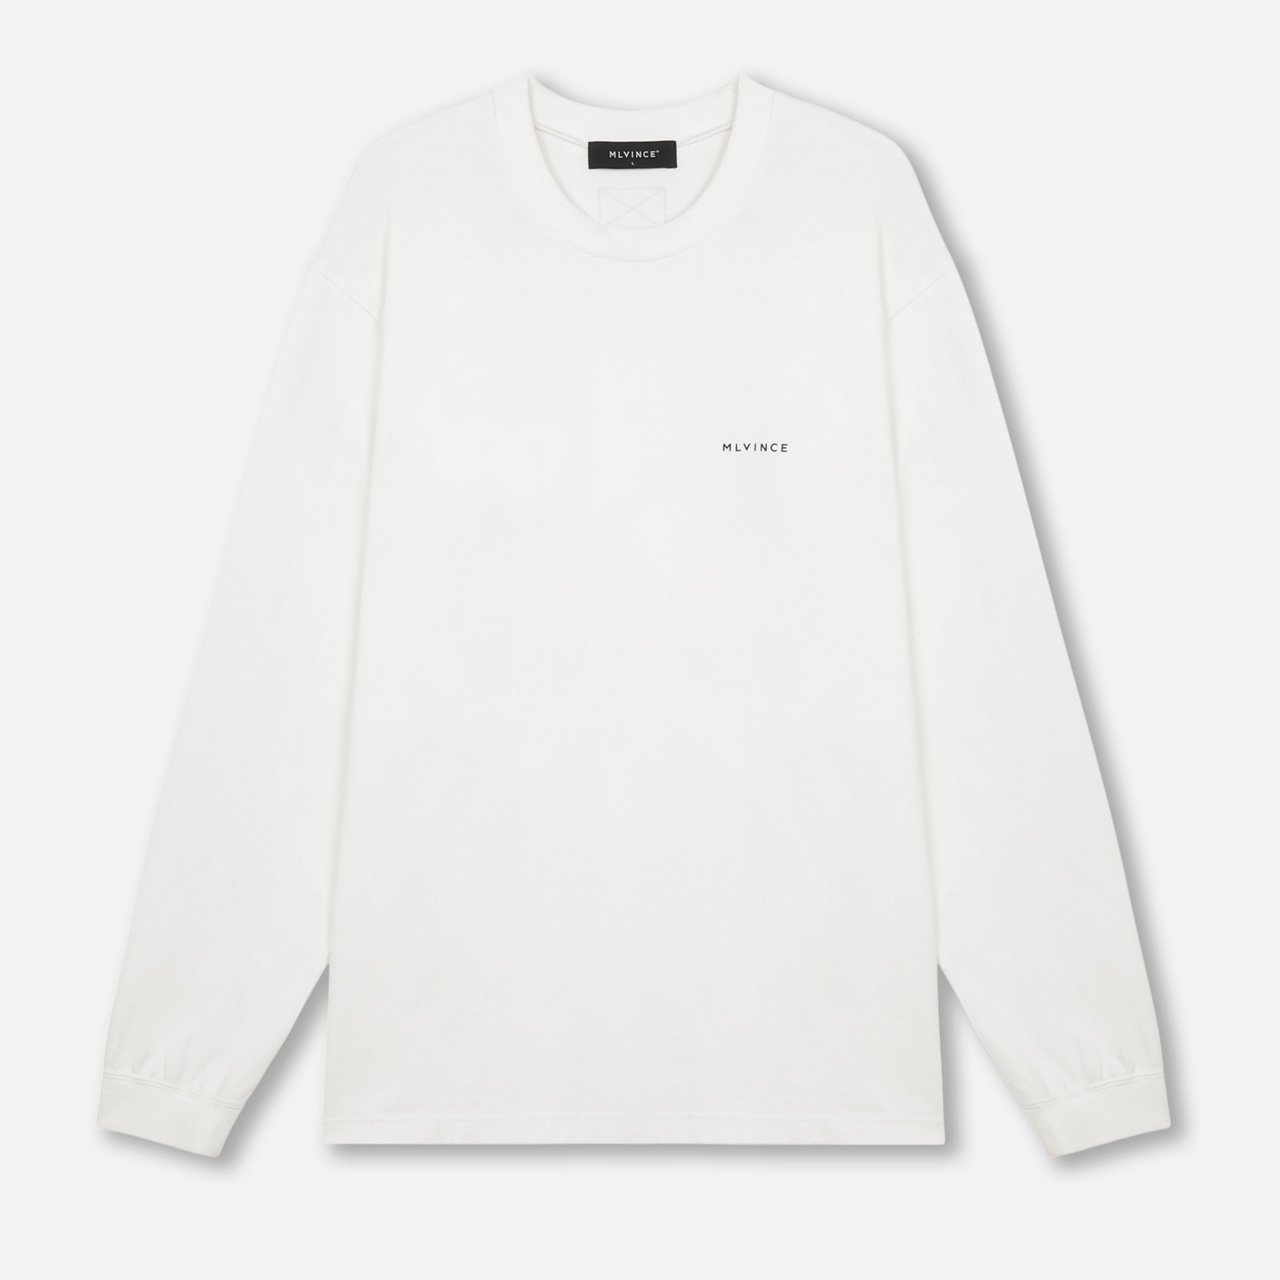 MLVINCE (メルヴィンス) 23FW/秋冬
CLASSIC LOGO L/S TEE